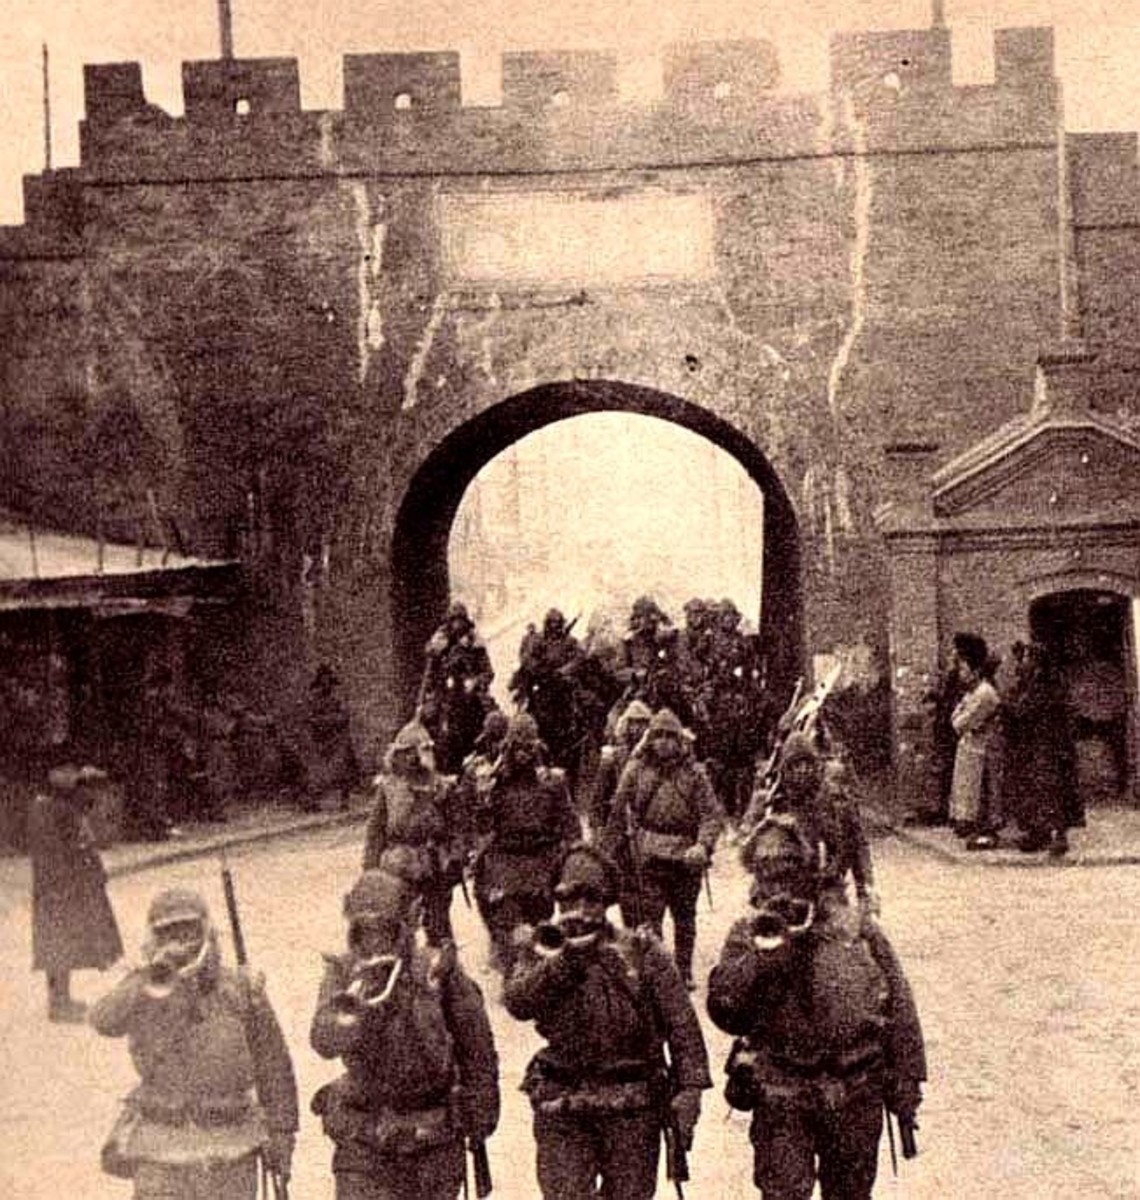 Japanese soldiers invade Manchuria.